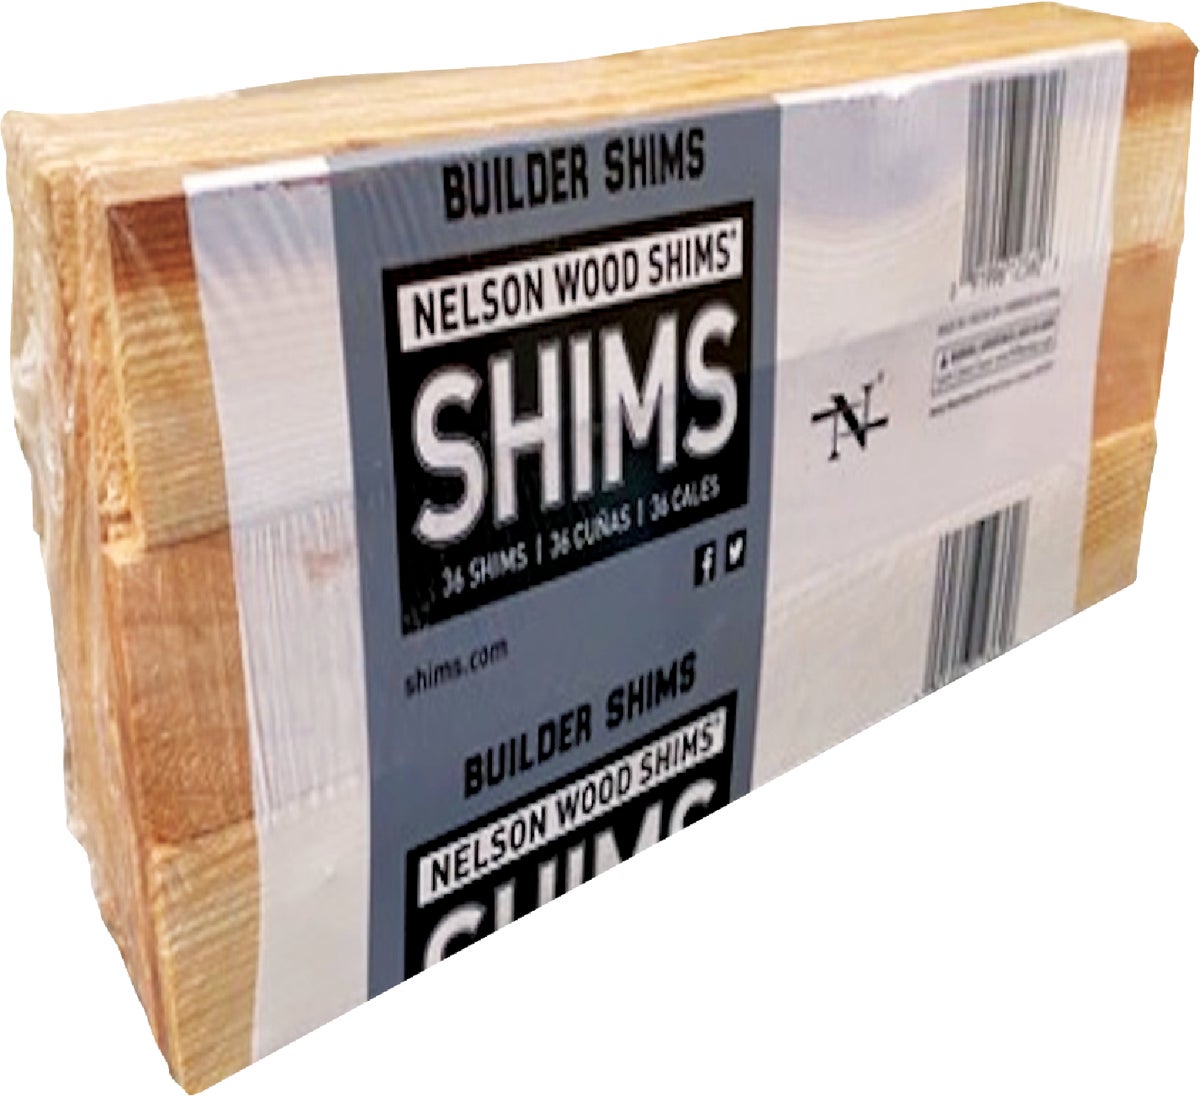 Composite Nelson Wood Shims Packages 5 12 shims per package LOT of 60 total 